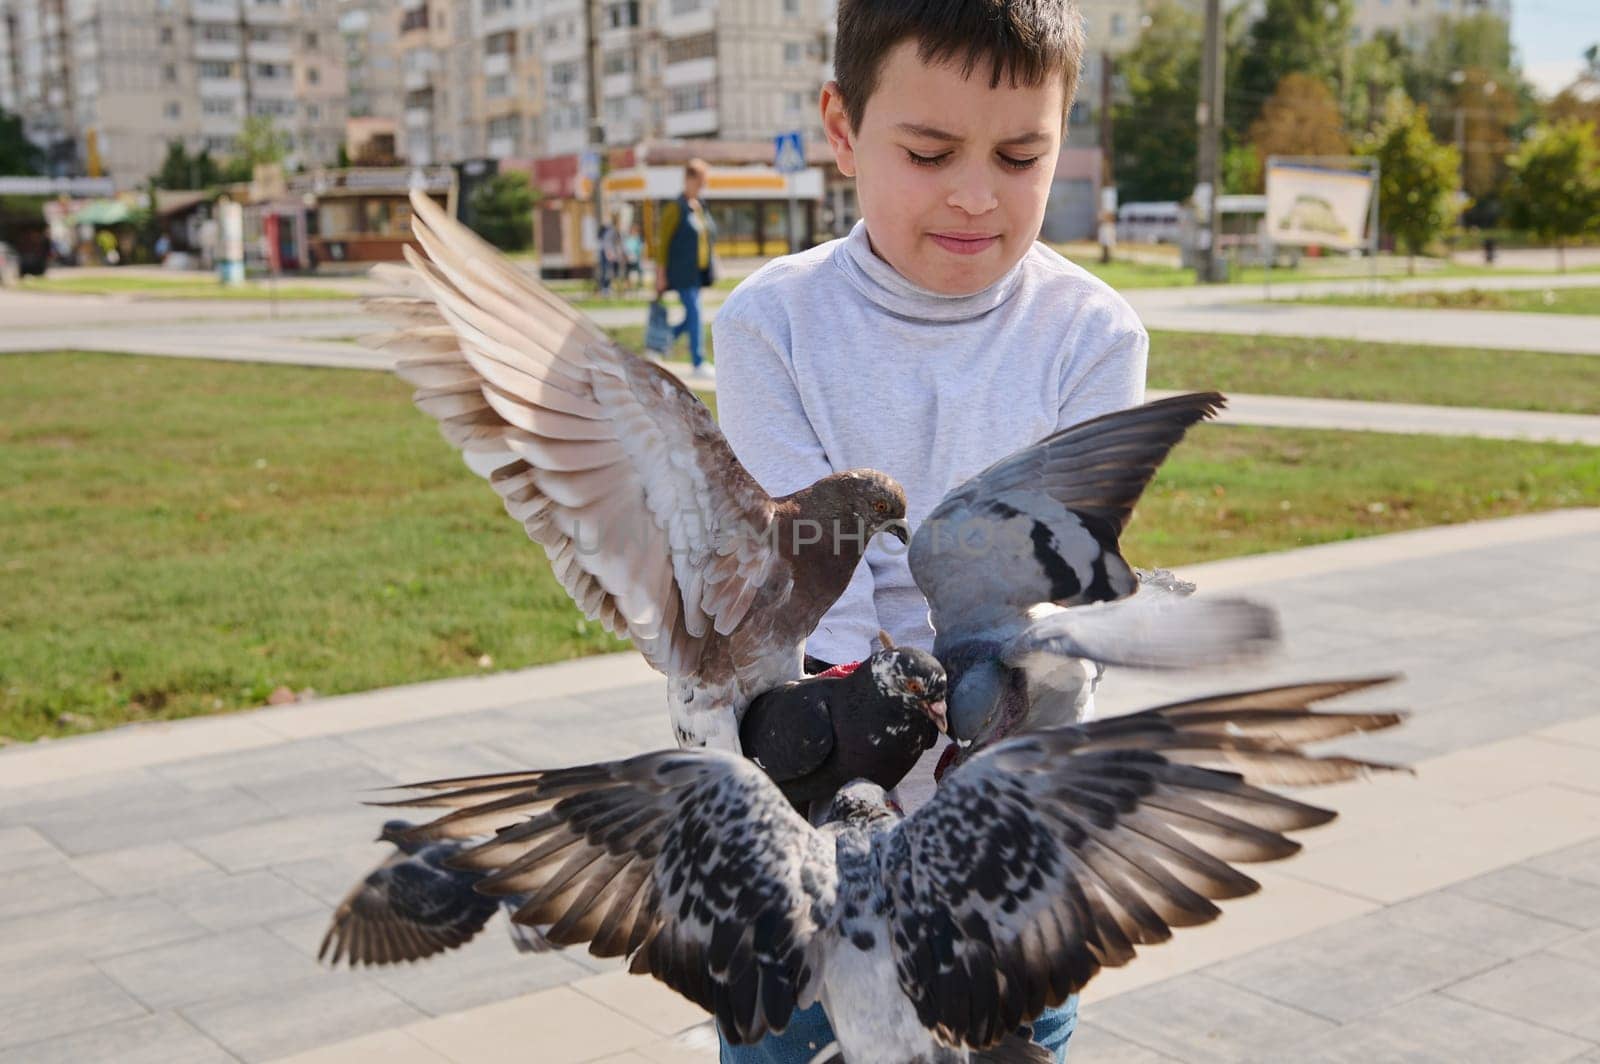 Selective focus of flock of doves flying to hands of boy feeding them with seeds in town square. The concept of love, compassion, kindness and care for animals. People and nature. Lifestyle.